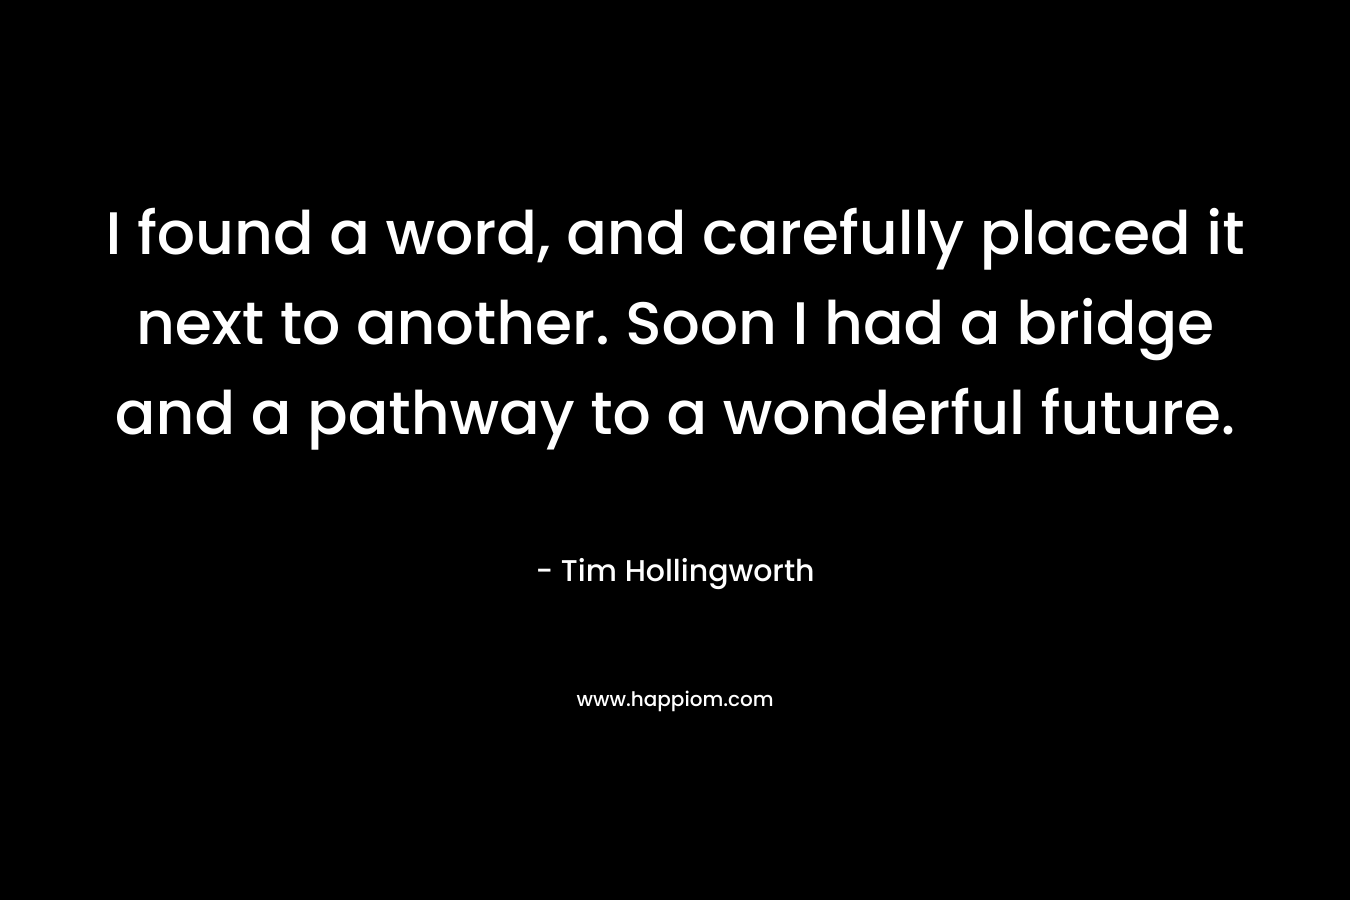 I found a word, and carefully placed it next to another. Soon I had a bridge and a pathway to a wonderful future. – Tim Hollingworth